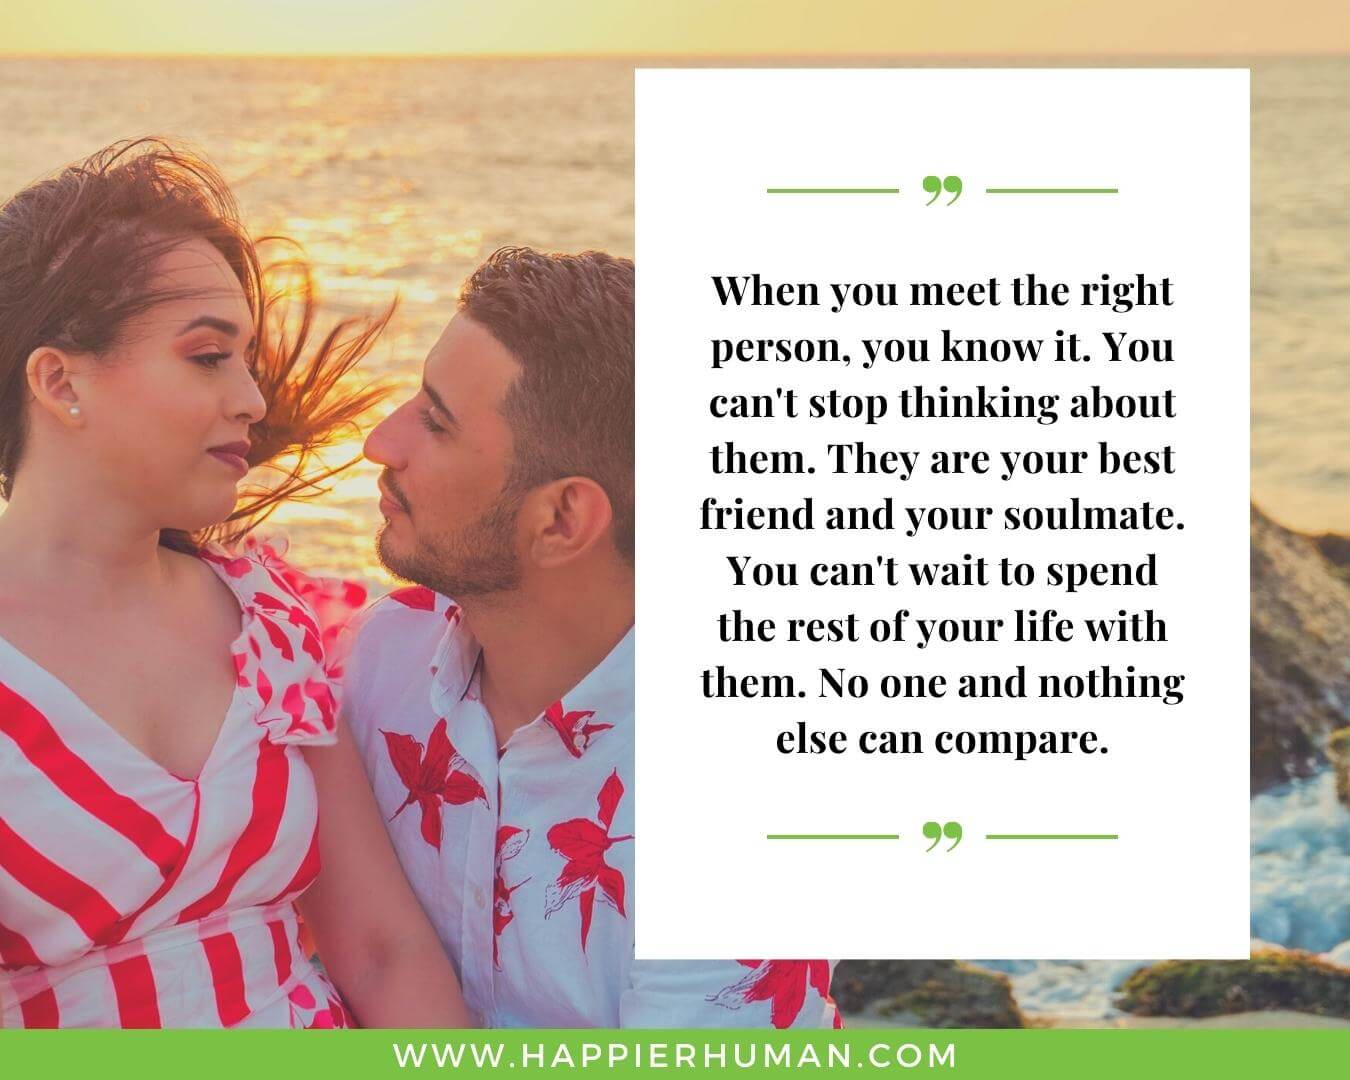 Unconditional Love Quotes for Her - “When you meet the right person, you know it. You can't stop thinking about them. They are your best friend and your soulmate. You can't wait to spend the rest of your life with them. No one and nothing else can compare.”